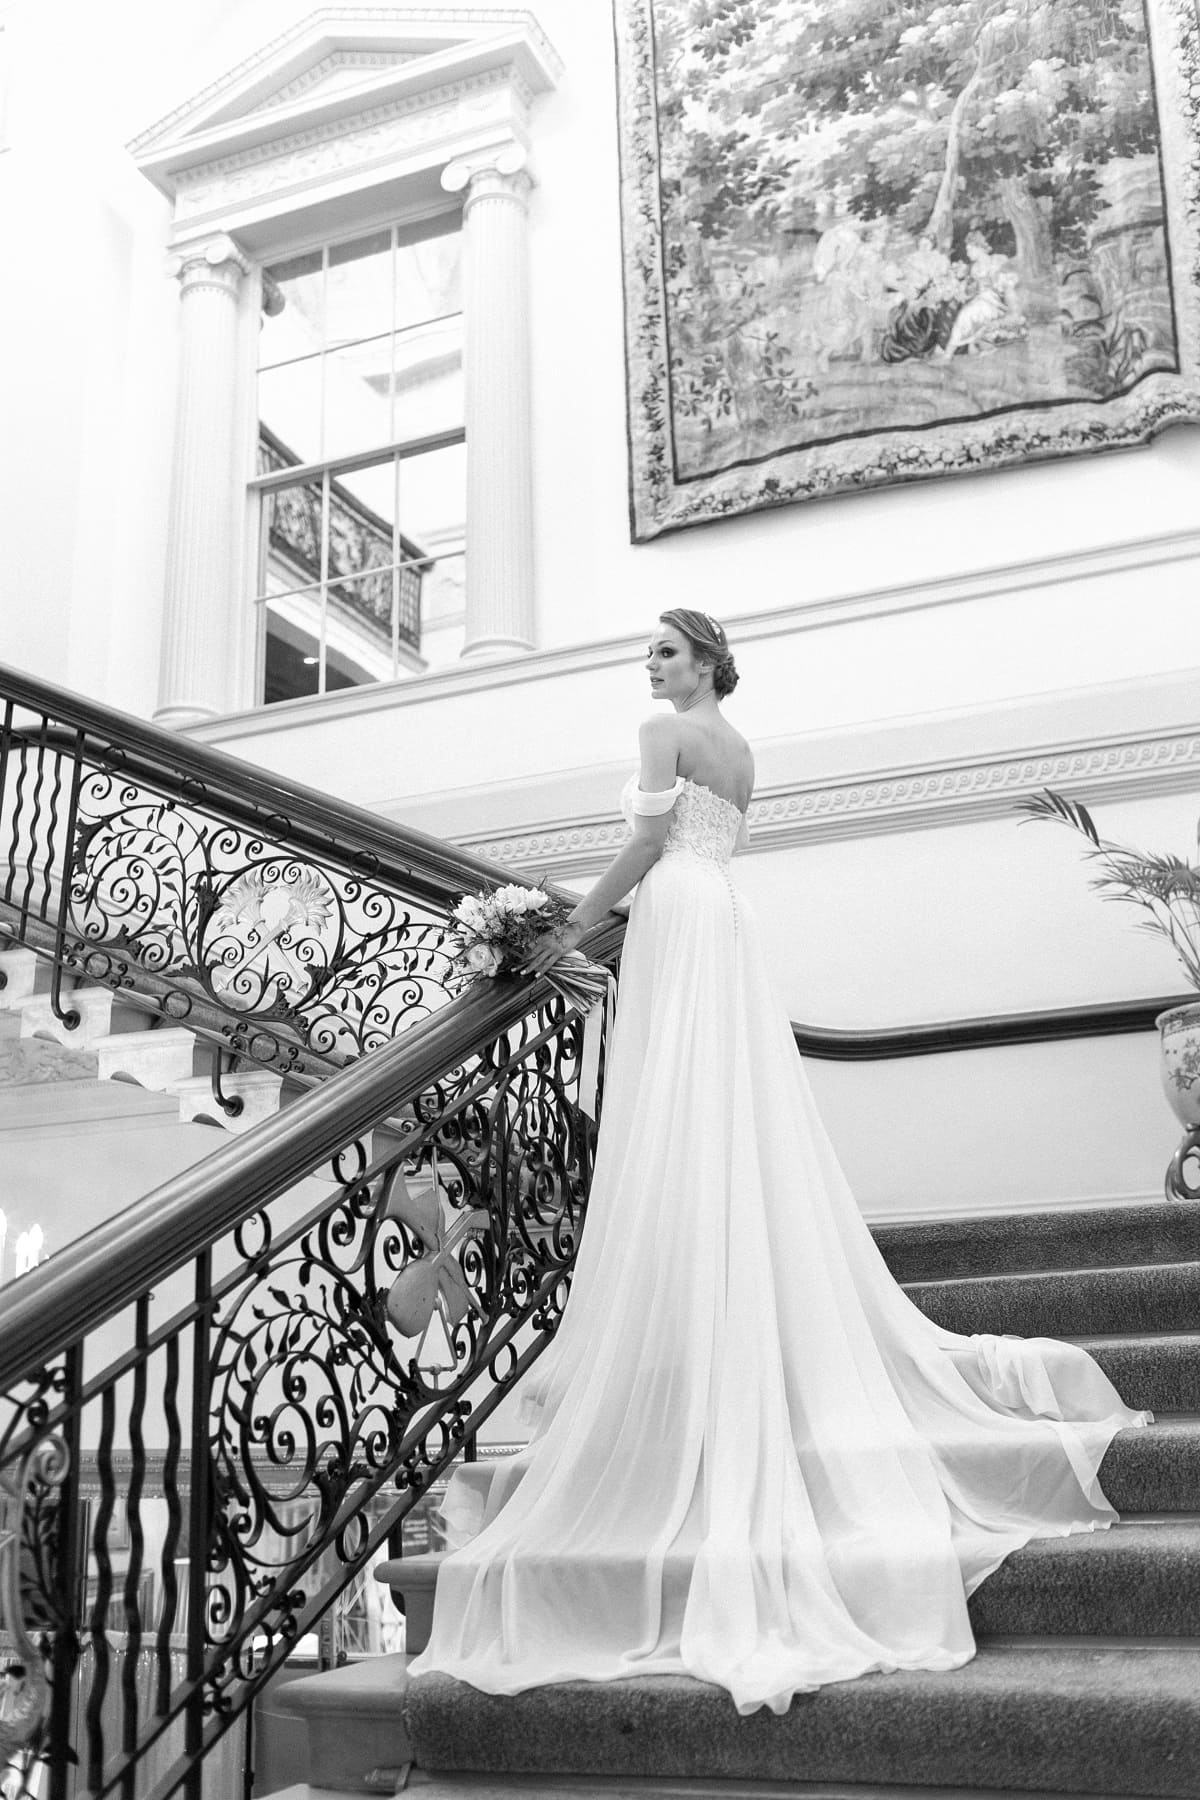 Love Lydia Wedding & Events UK, Europe, Worldwide - Valued Member of Weddings Abroad Guide Supplier Directory